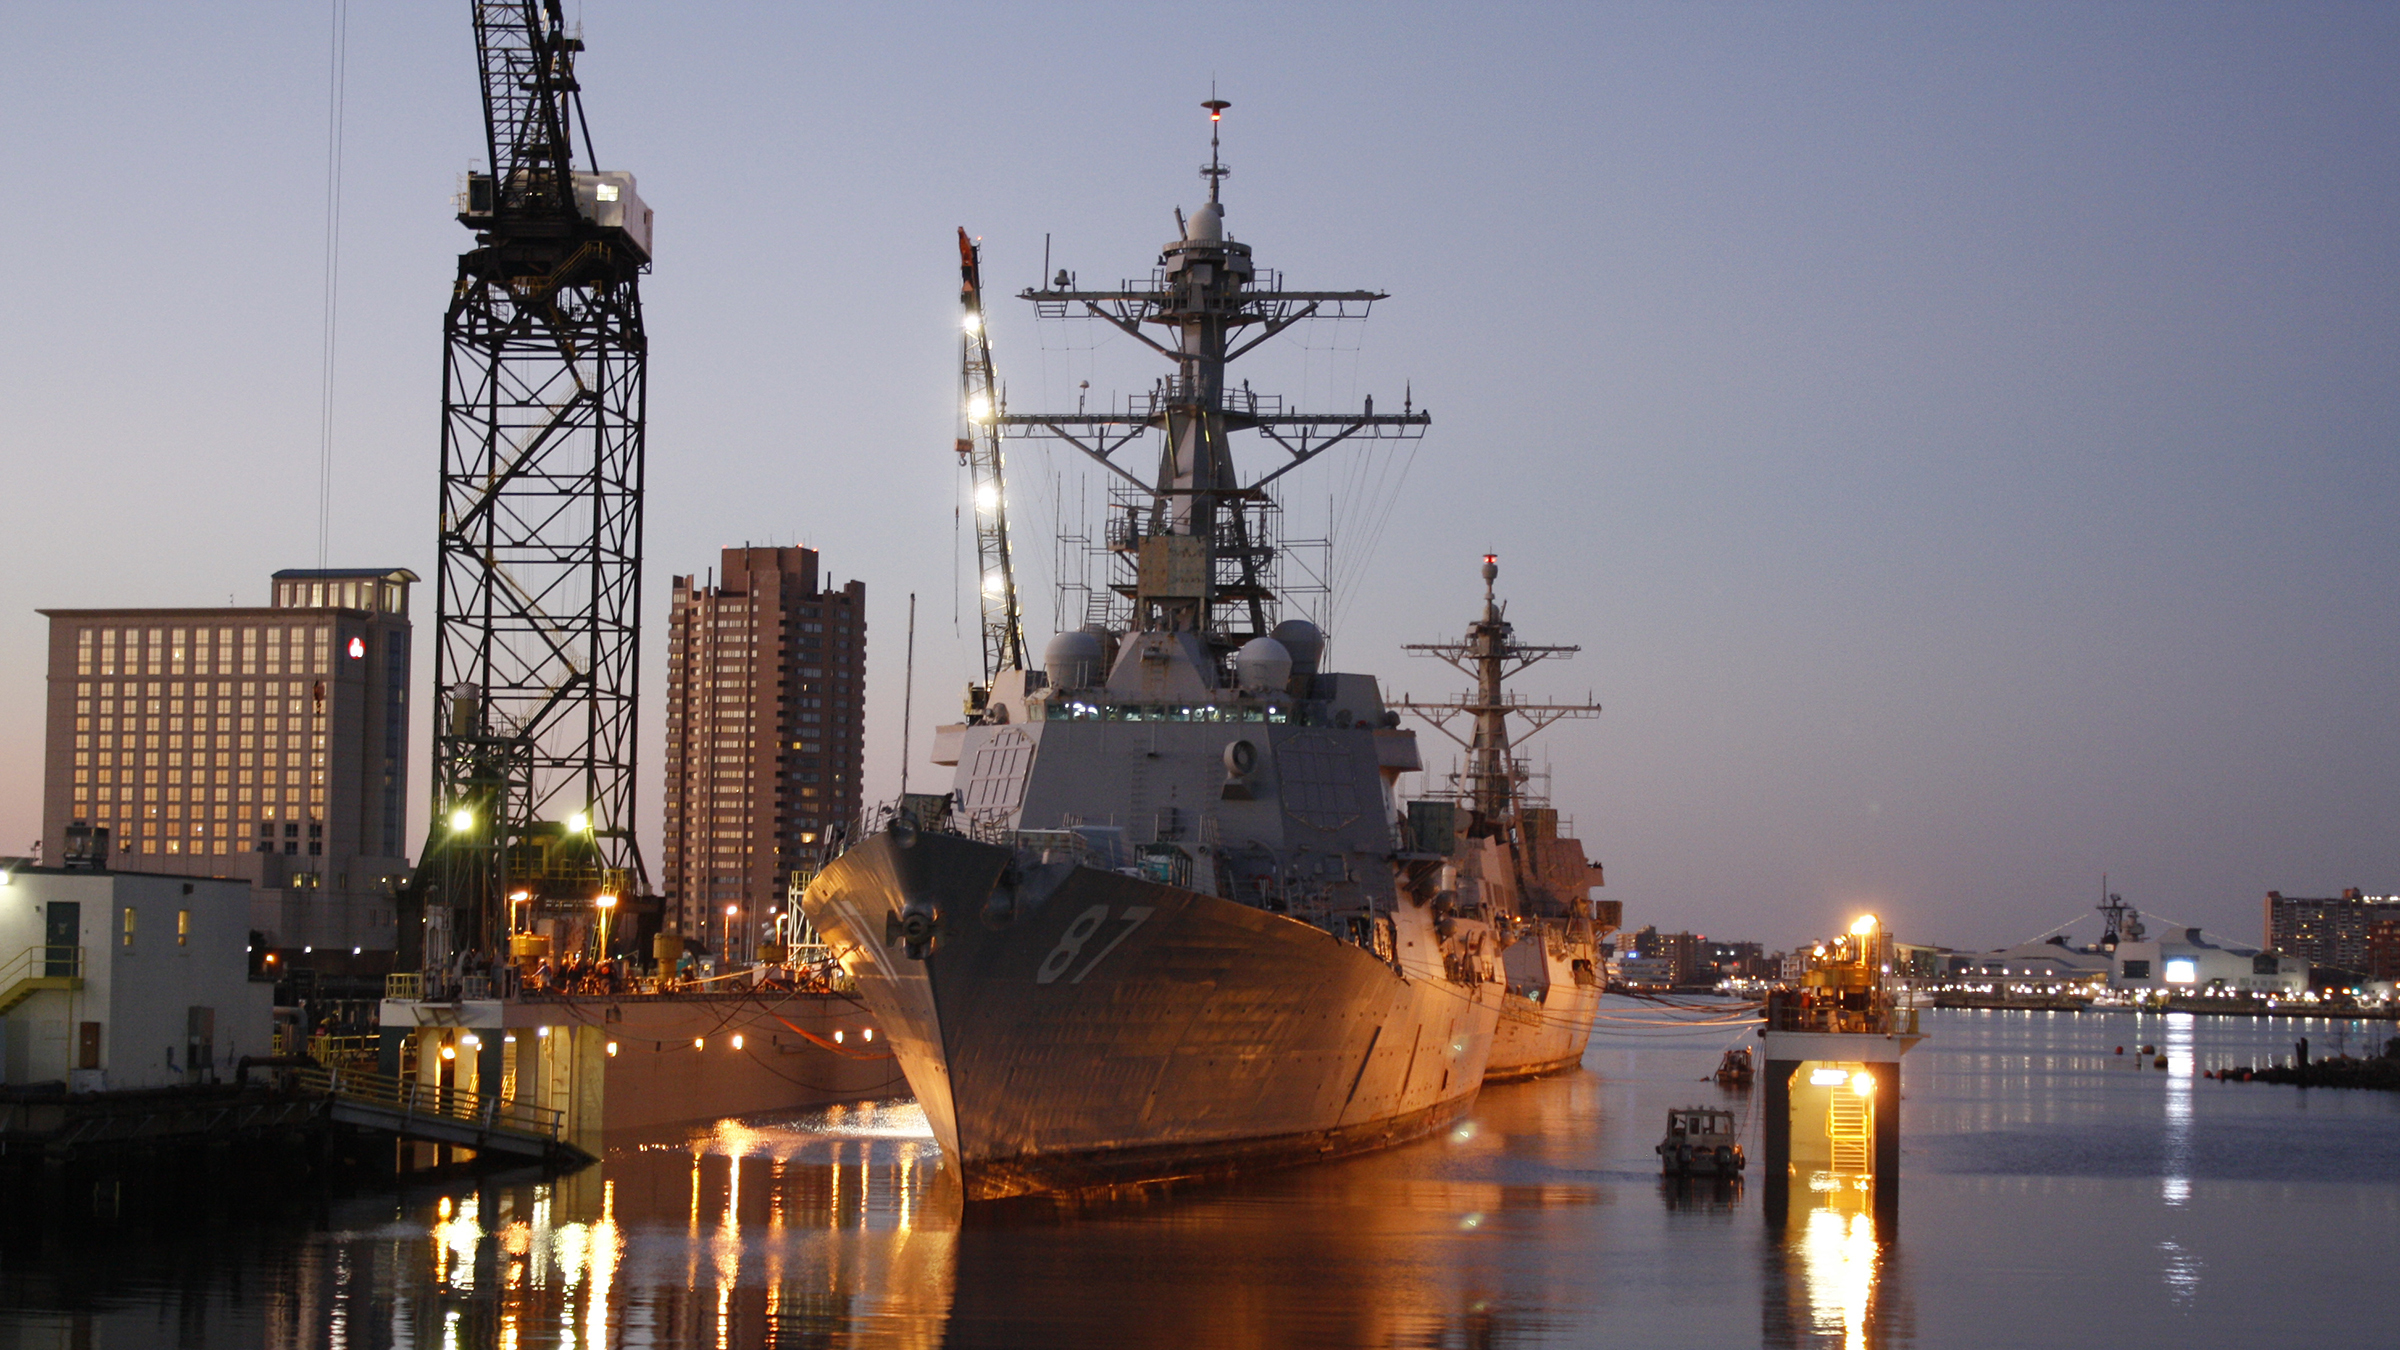 BAE Systems’ ship repair team will tandem dry-dock two Navy destroyers, the USS Decatur and USS Stethem. (Photo: BAE Systems)